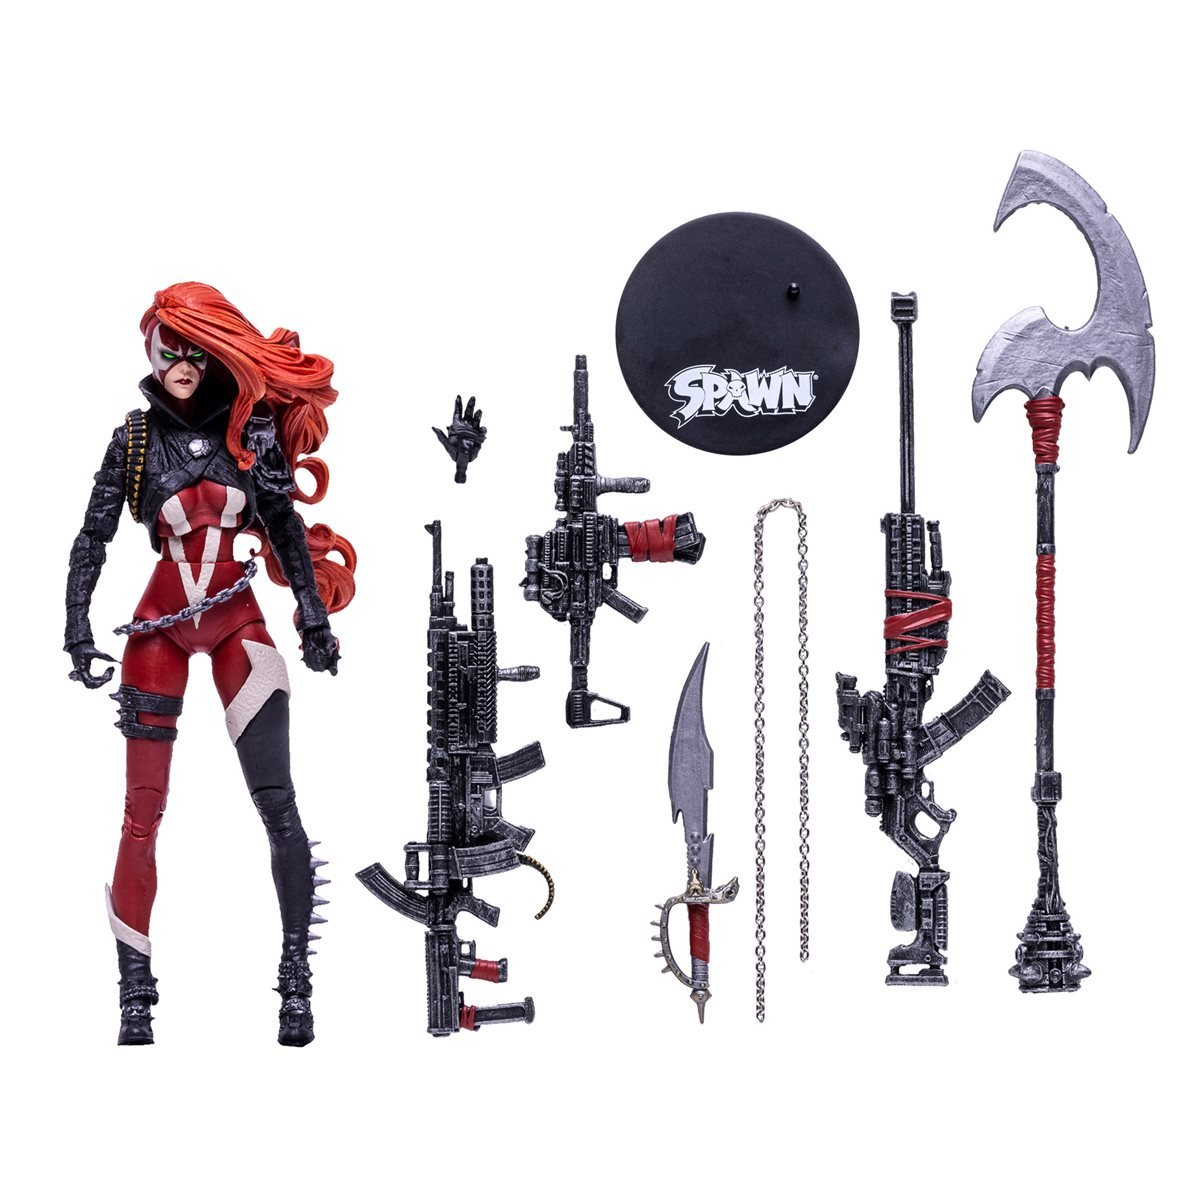 Spawn - She-Spawn Deluxe Set